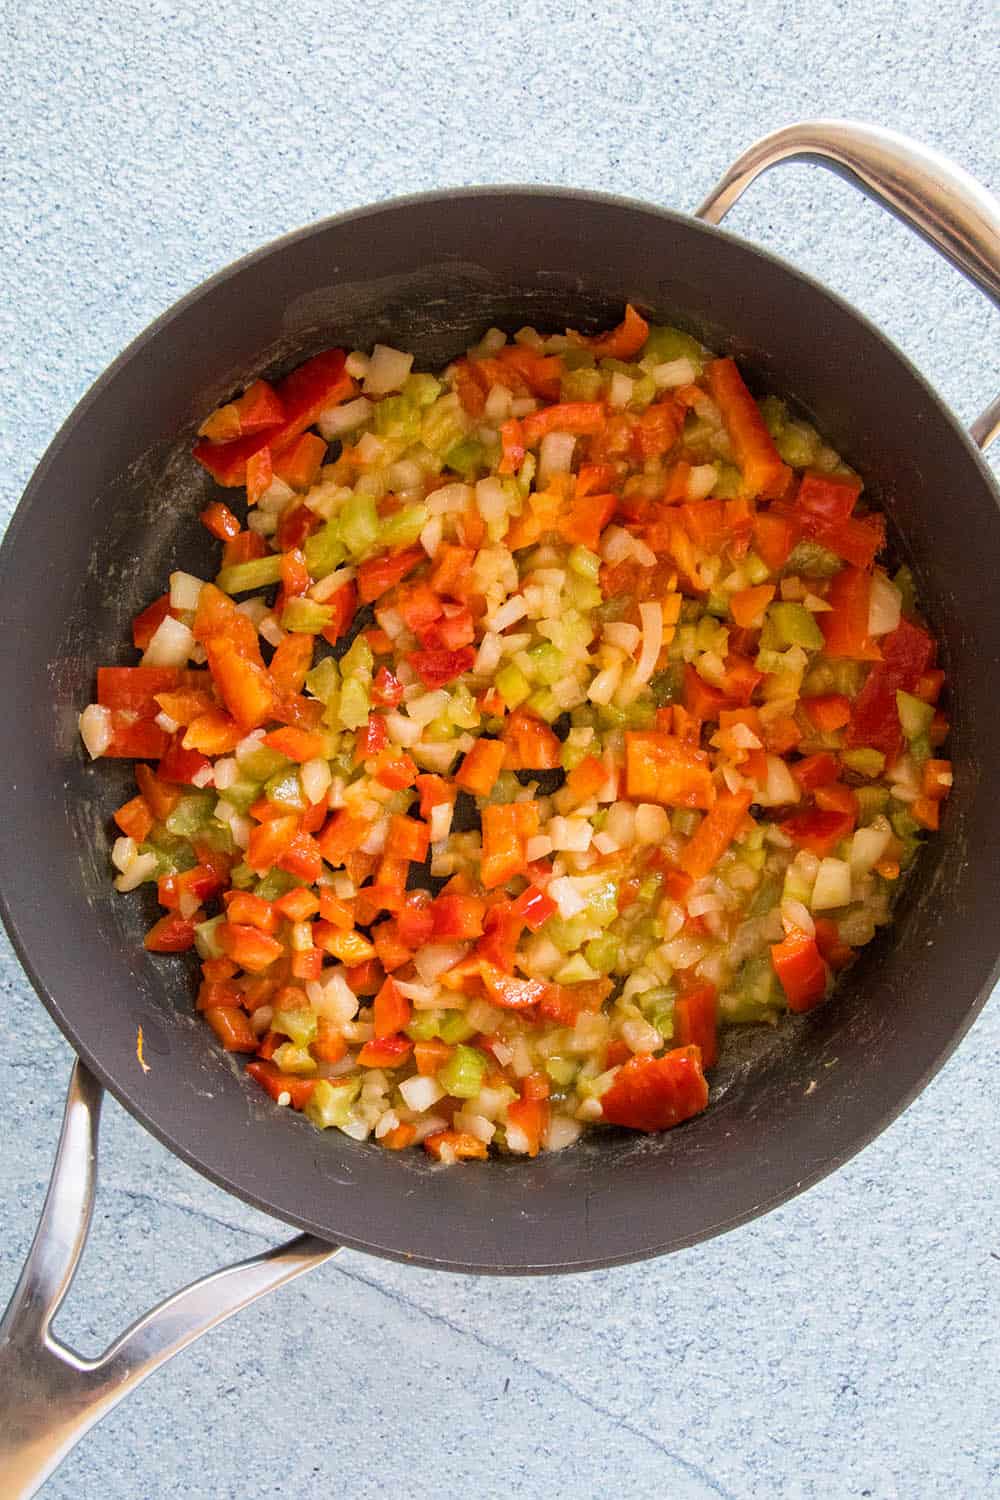 Cooking down the Holy Trinity of onion, bell pepper and celery